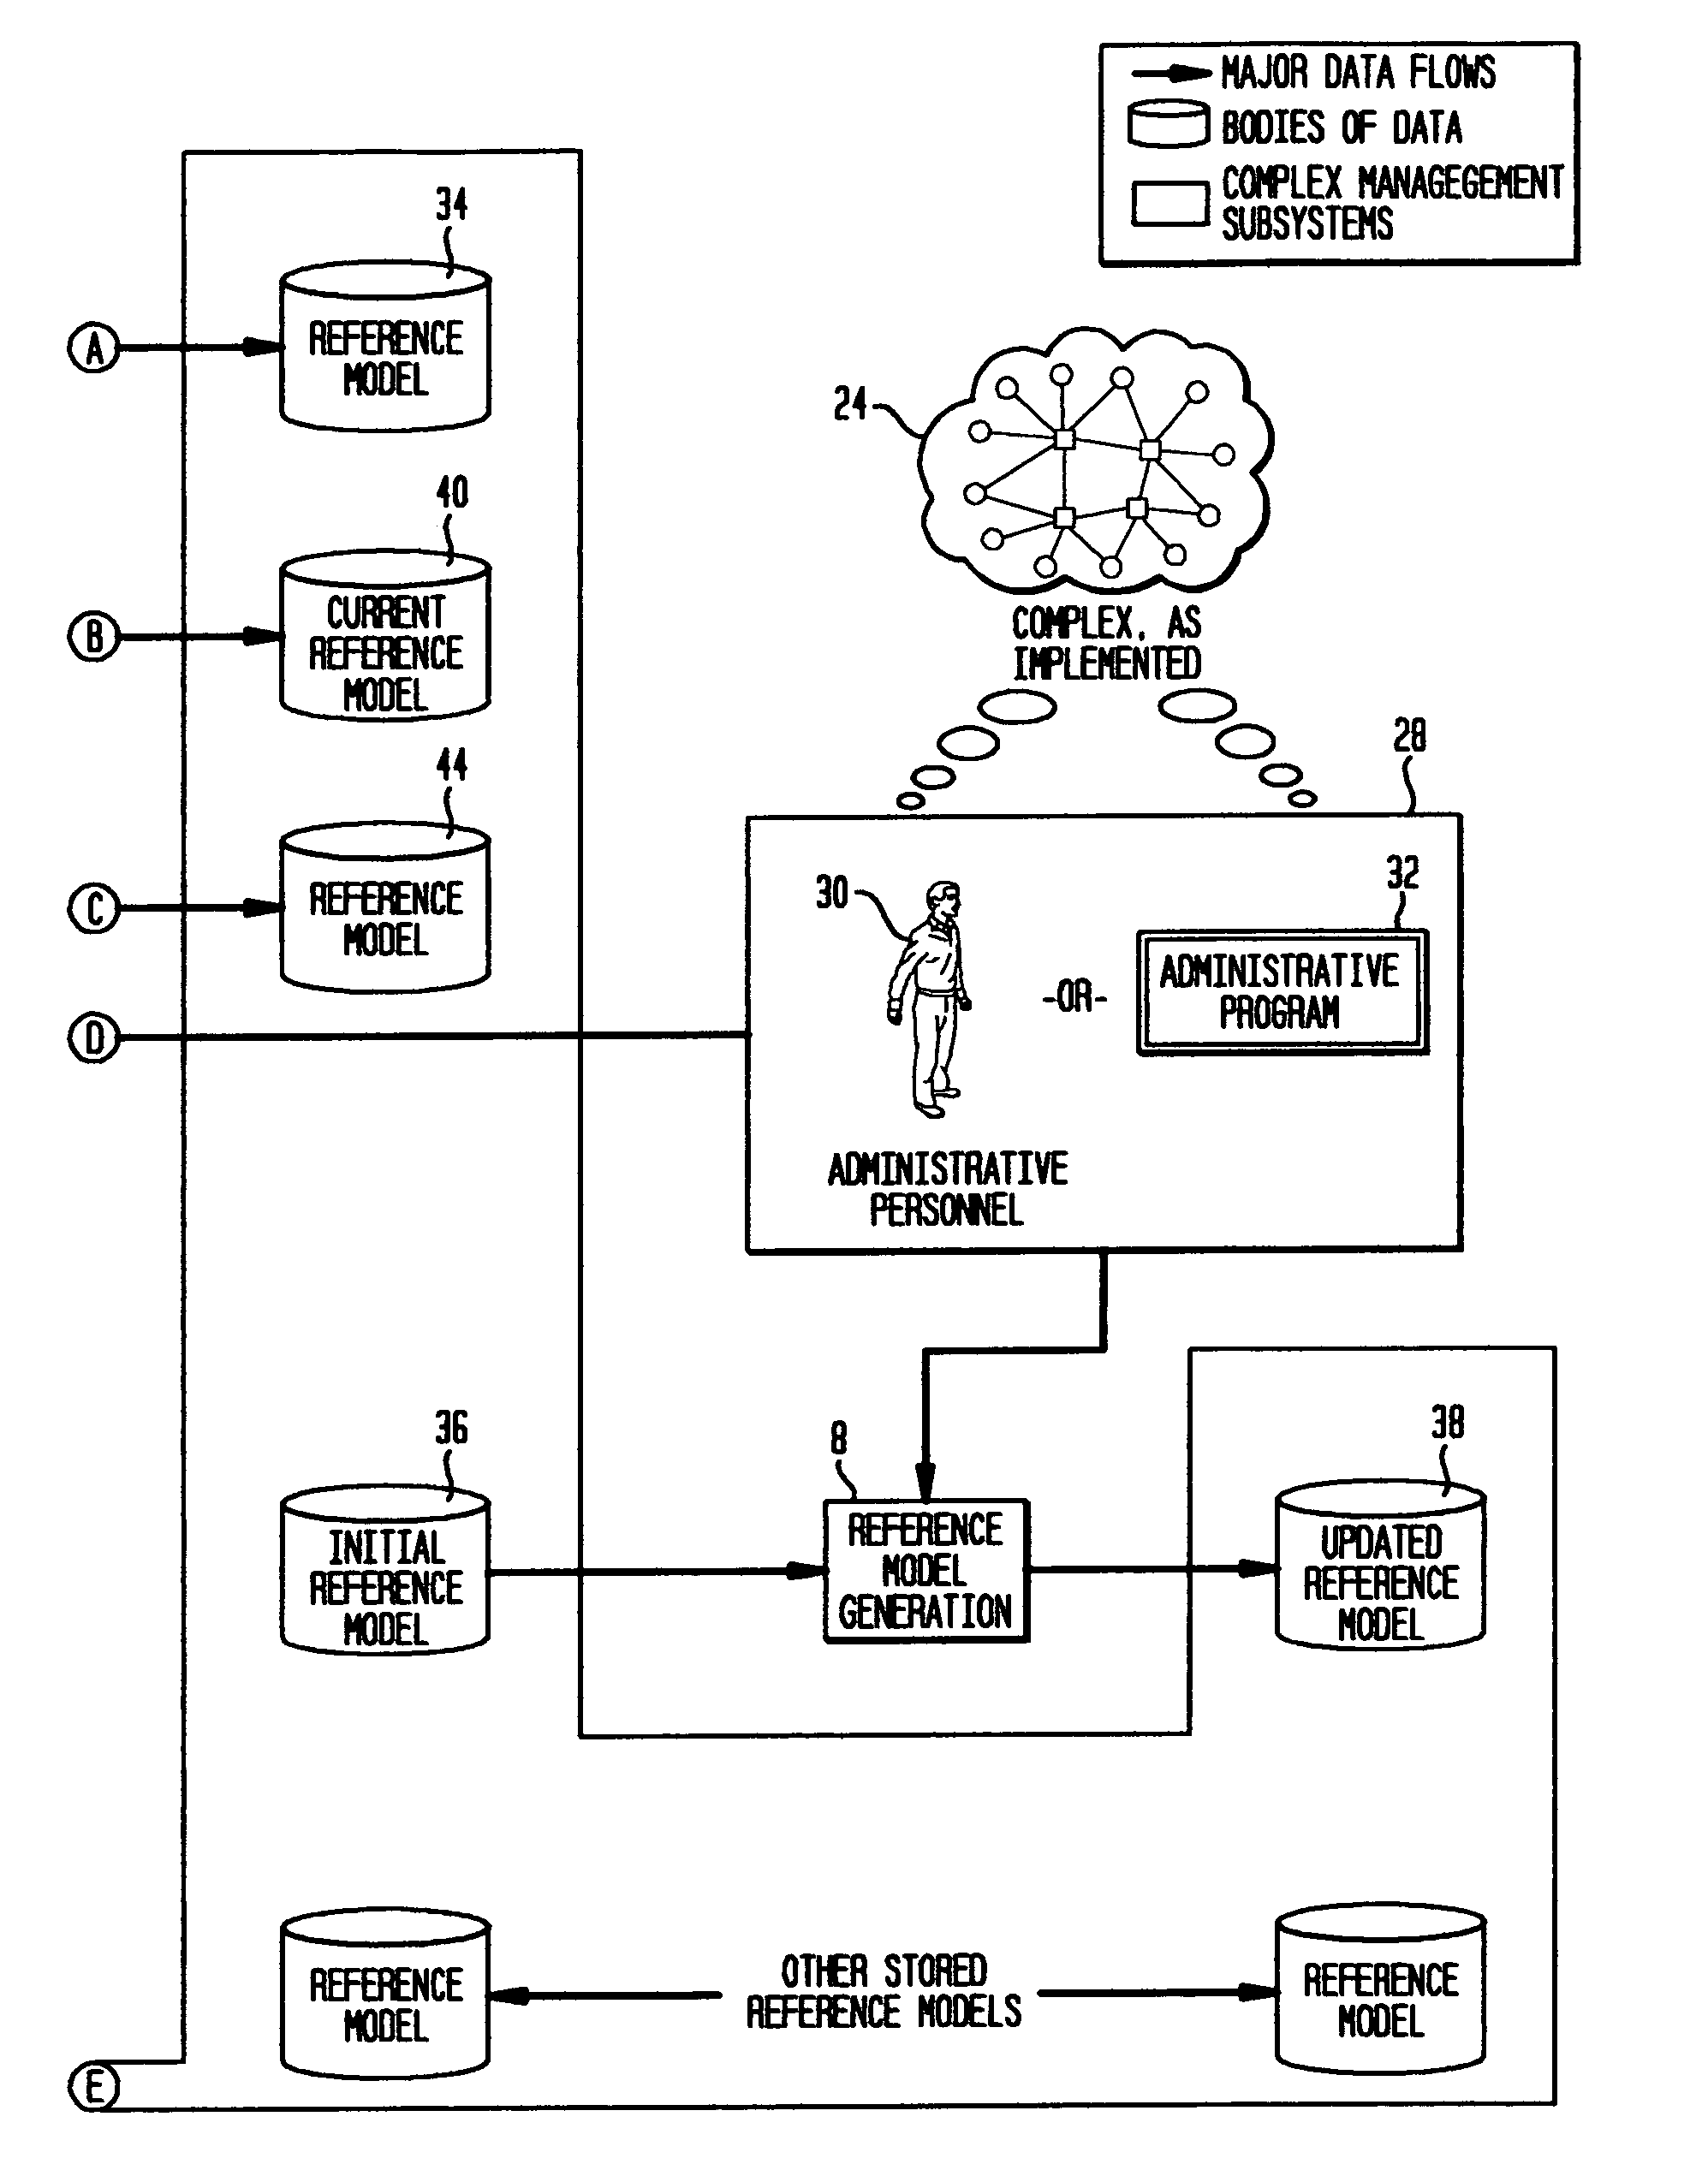 Method and apparatus for reference model change generation in managed systems